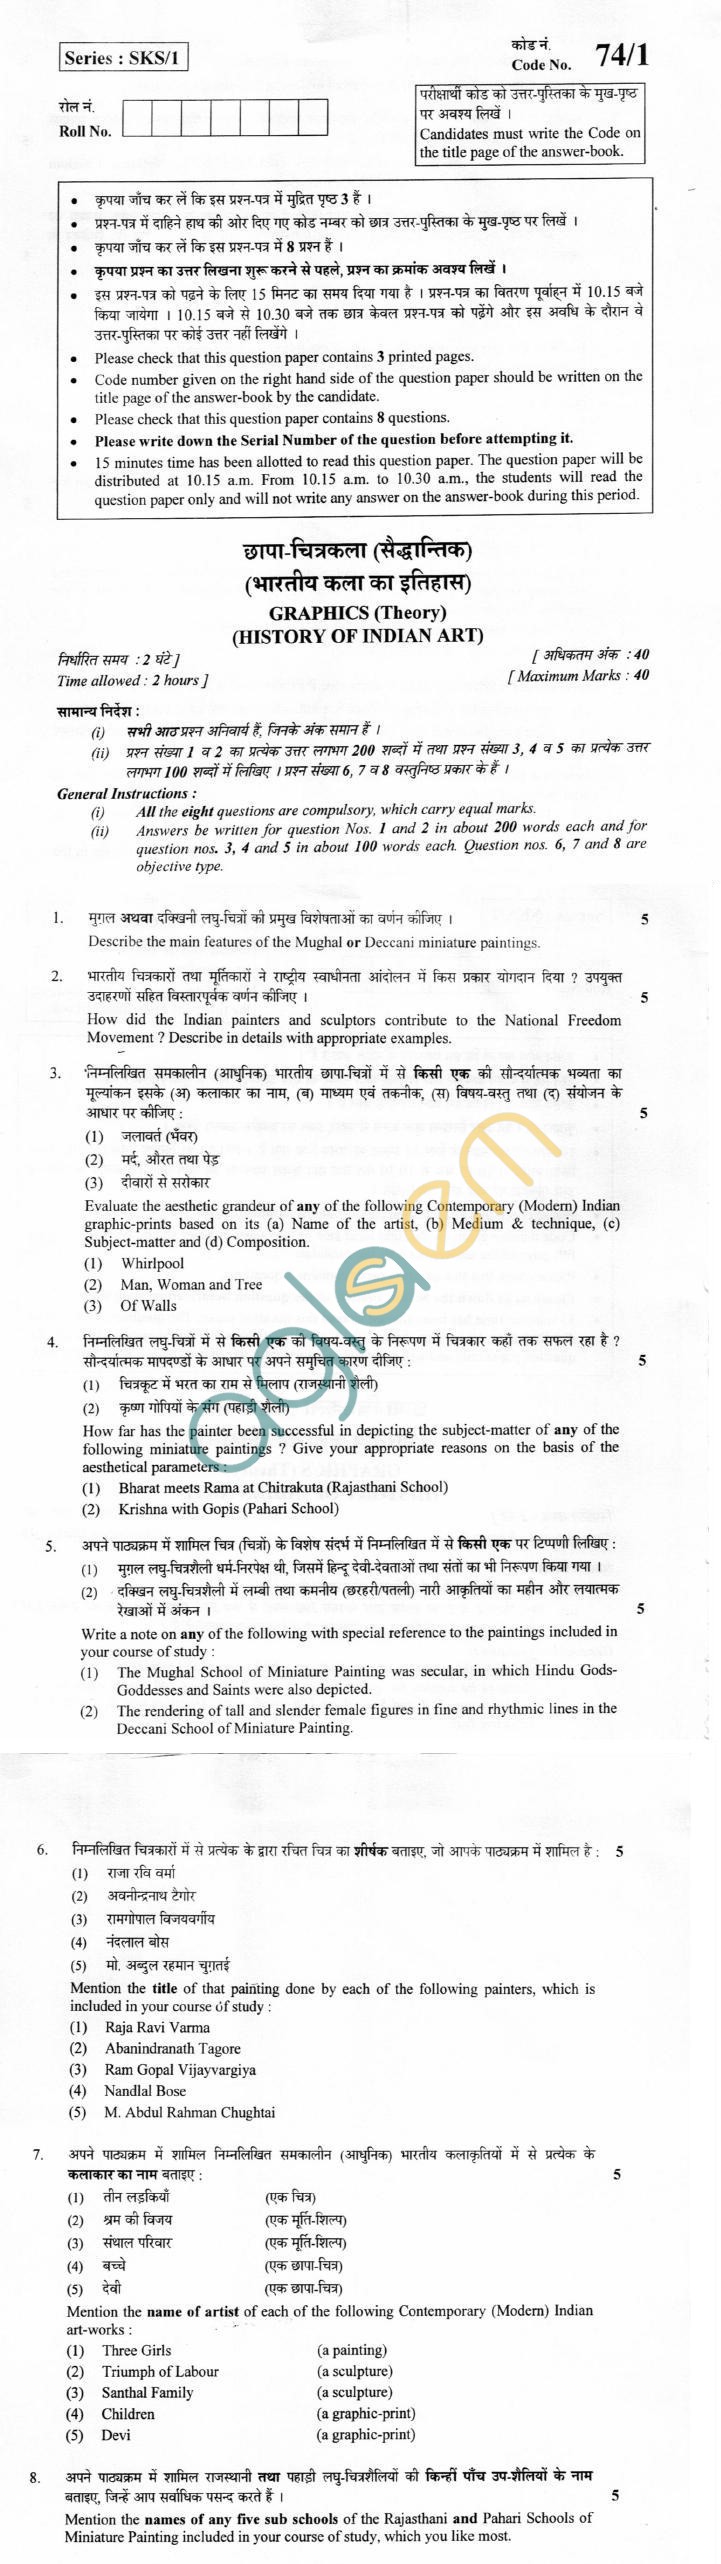 CBSE Board Exam 2013 Class XII Question Paper - Graphics